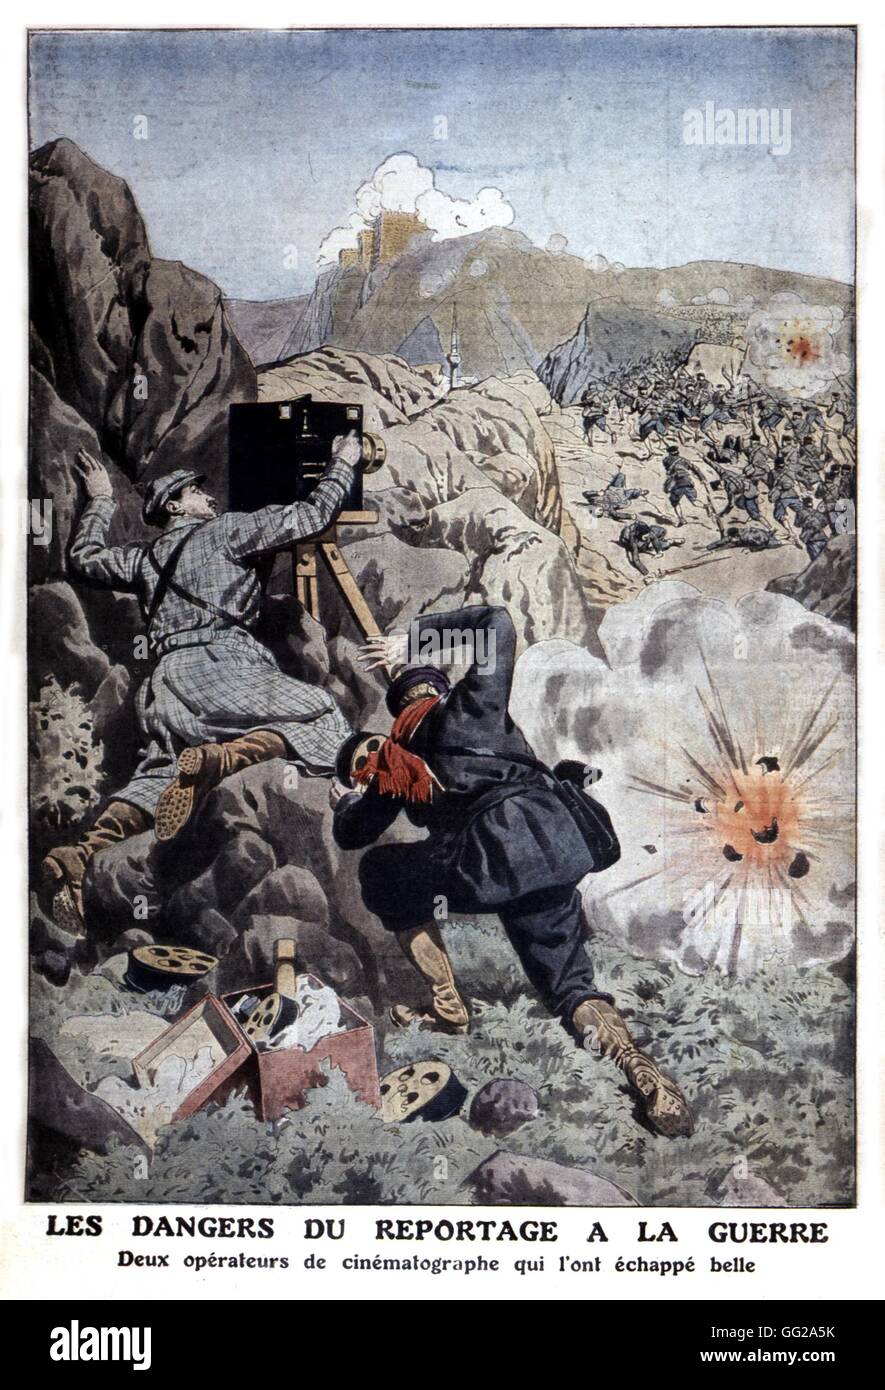 Dangers incurred by war reporters, in 'Le Petit journal' newspaper  1912 China Rousseau collection Stock Photo